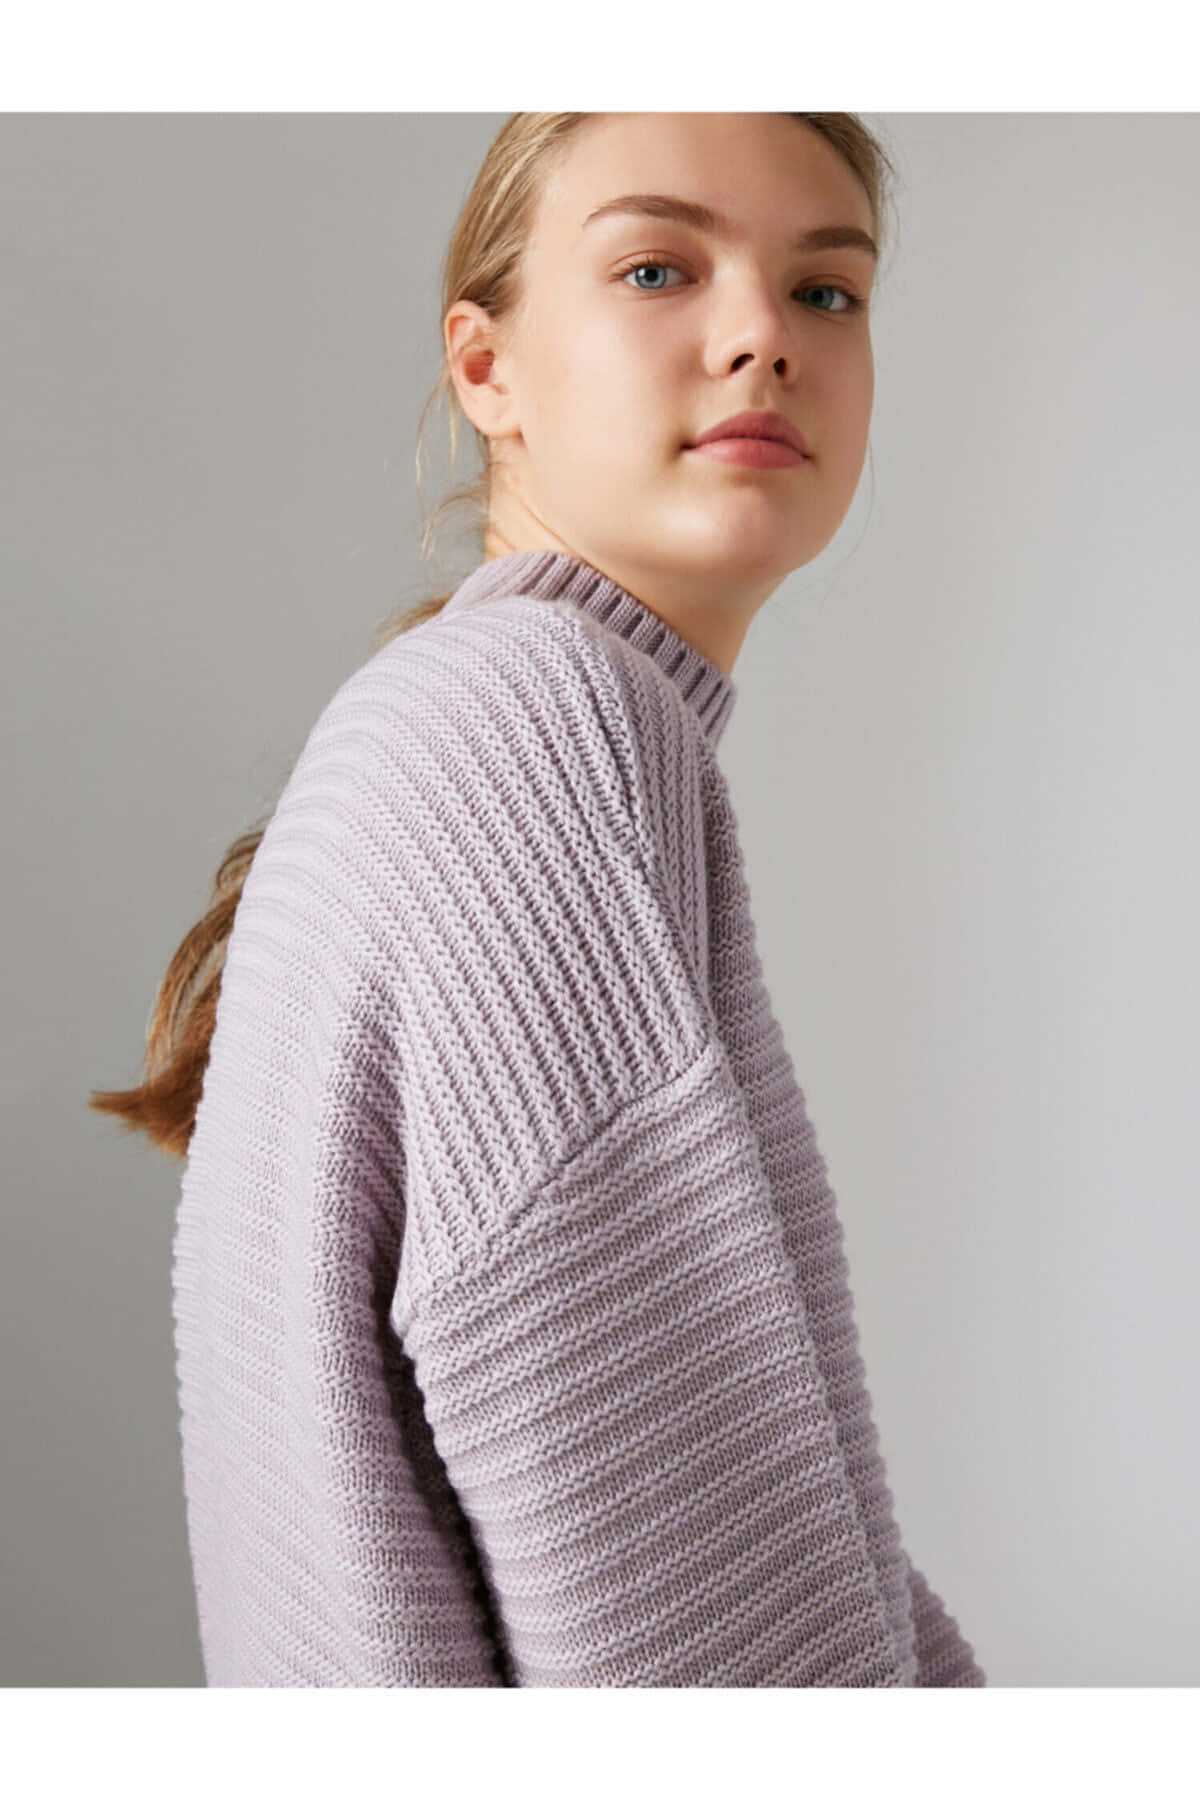 Look stylish and stay cozy in this beautiful purple turtleneck sweater. Wallpaper